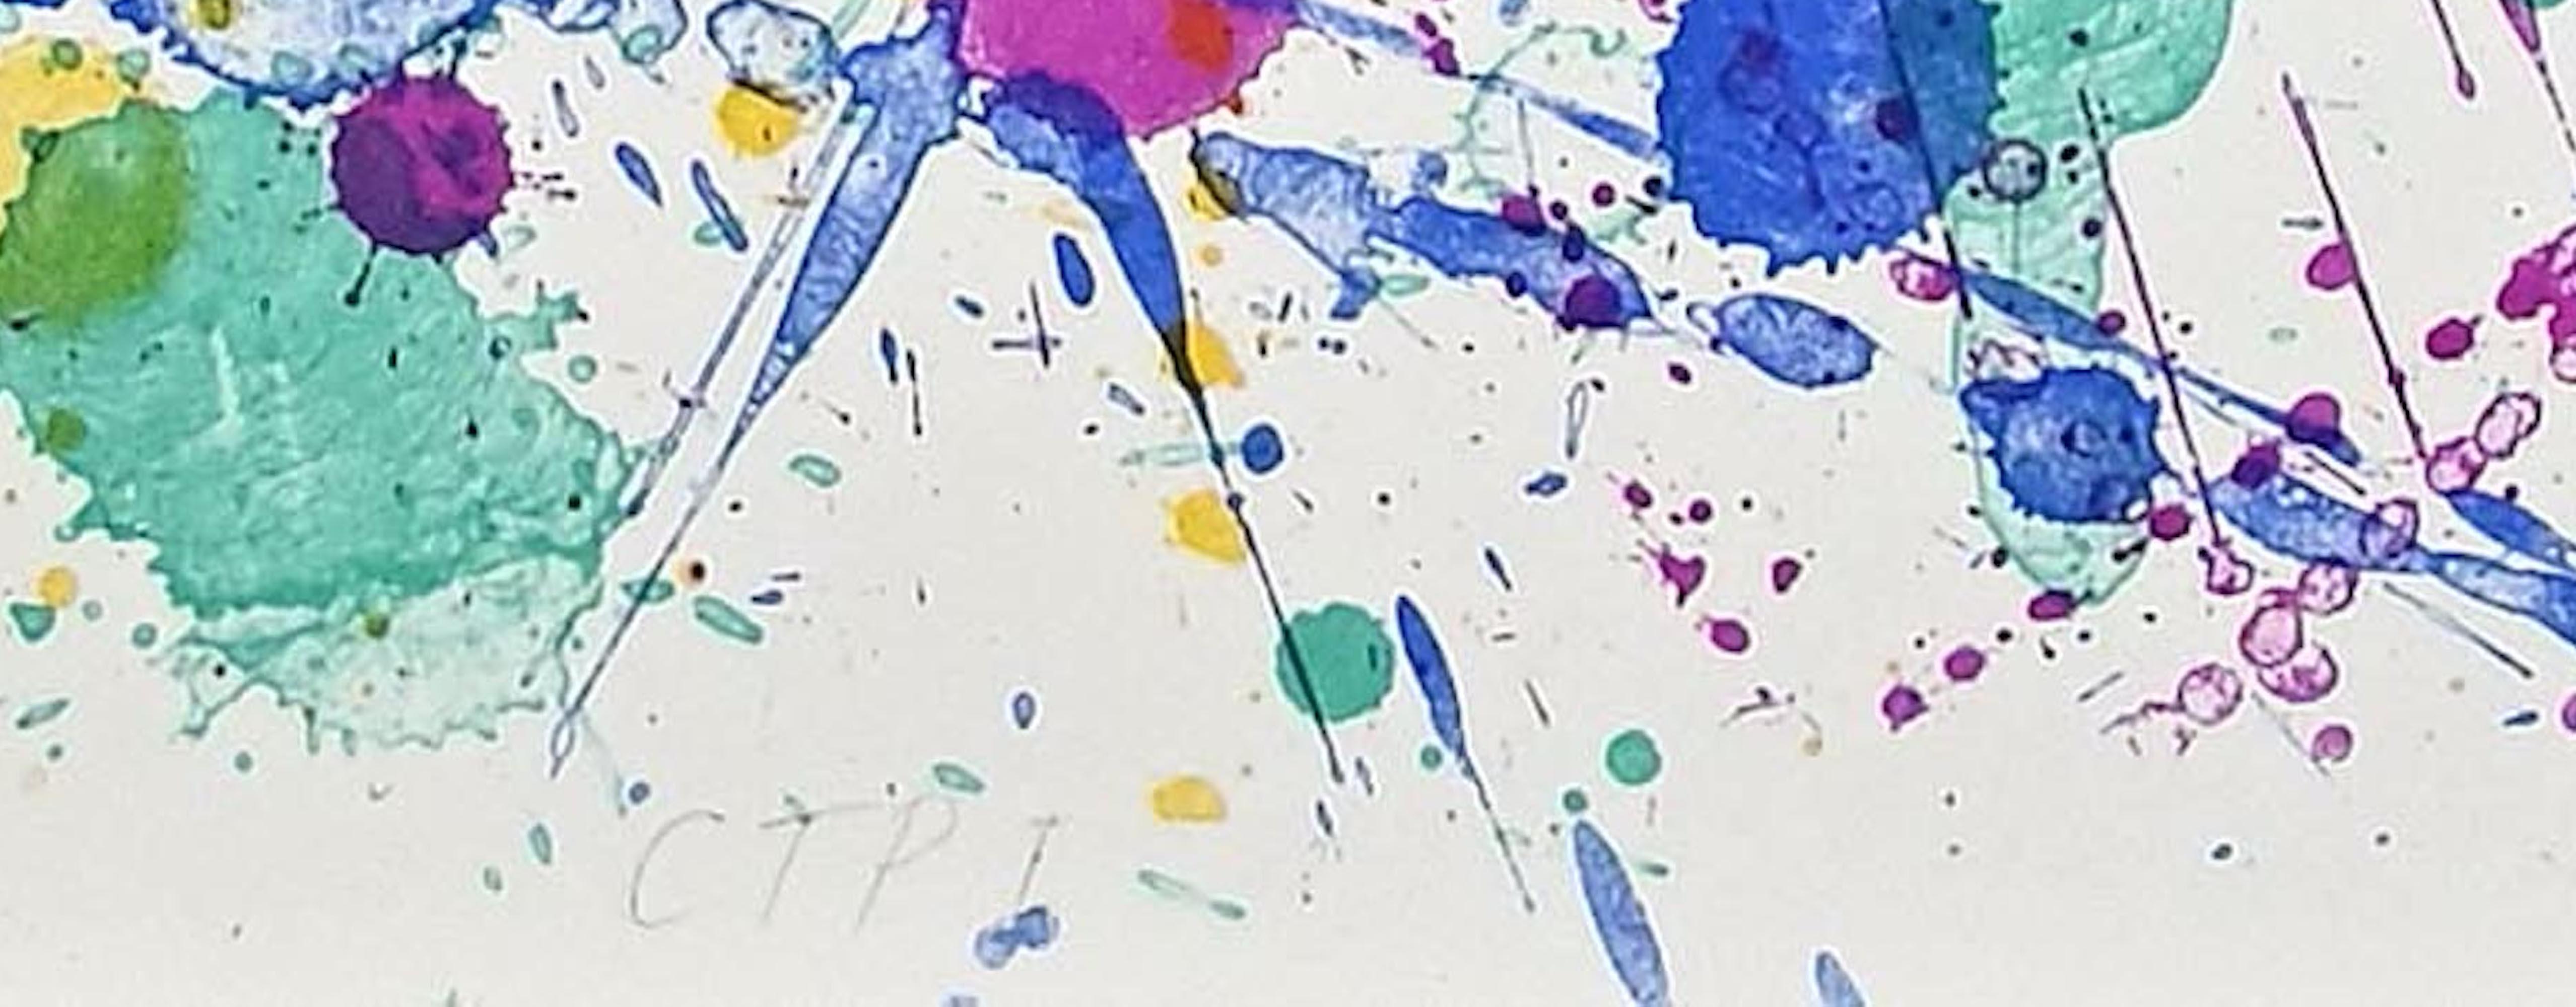 Untitled - Lithograph by Sam Francis - 1980 For Sale 3